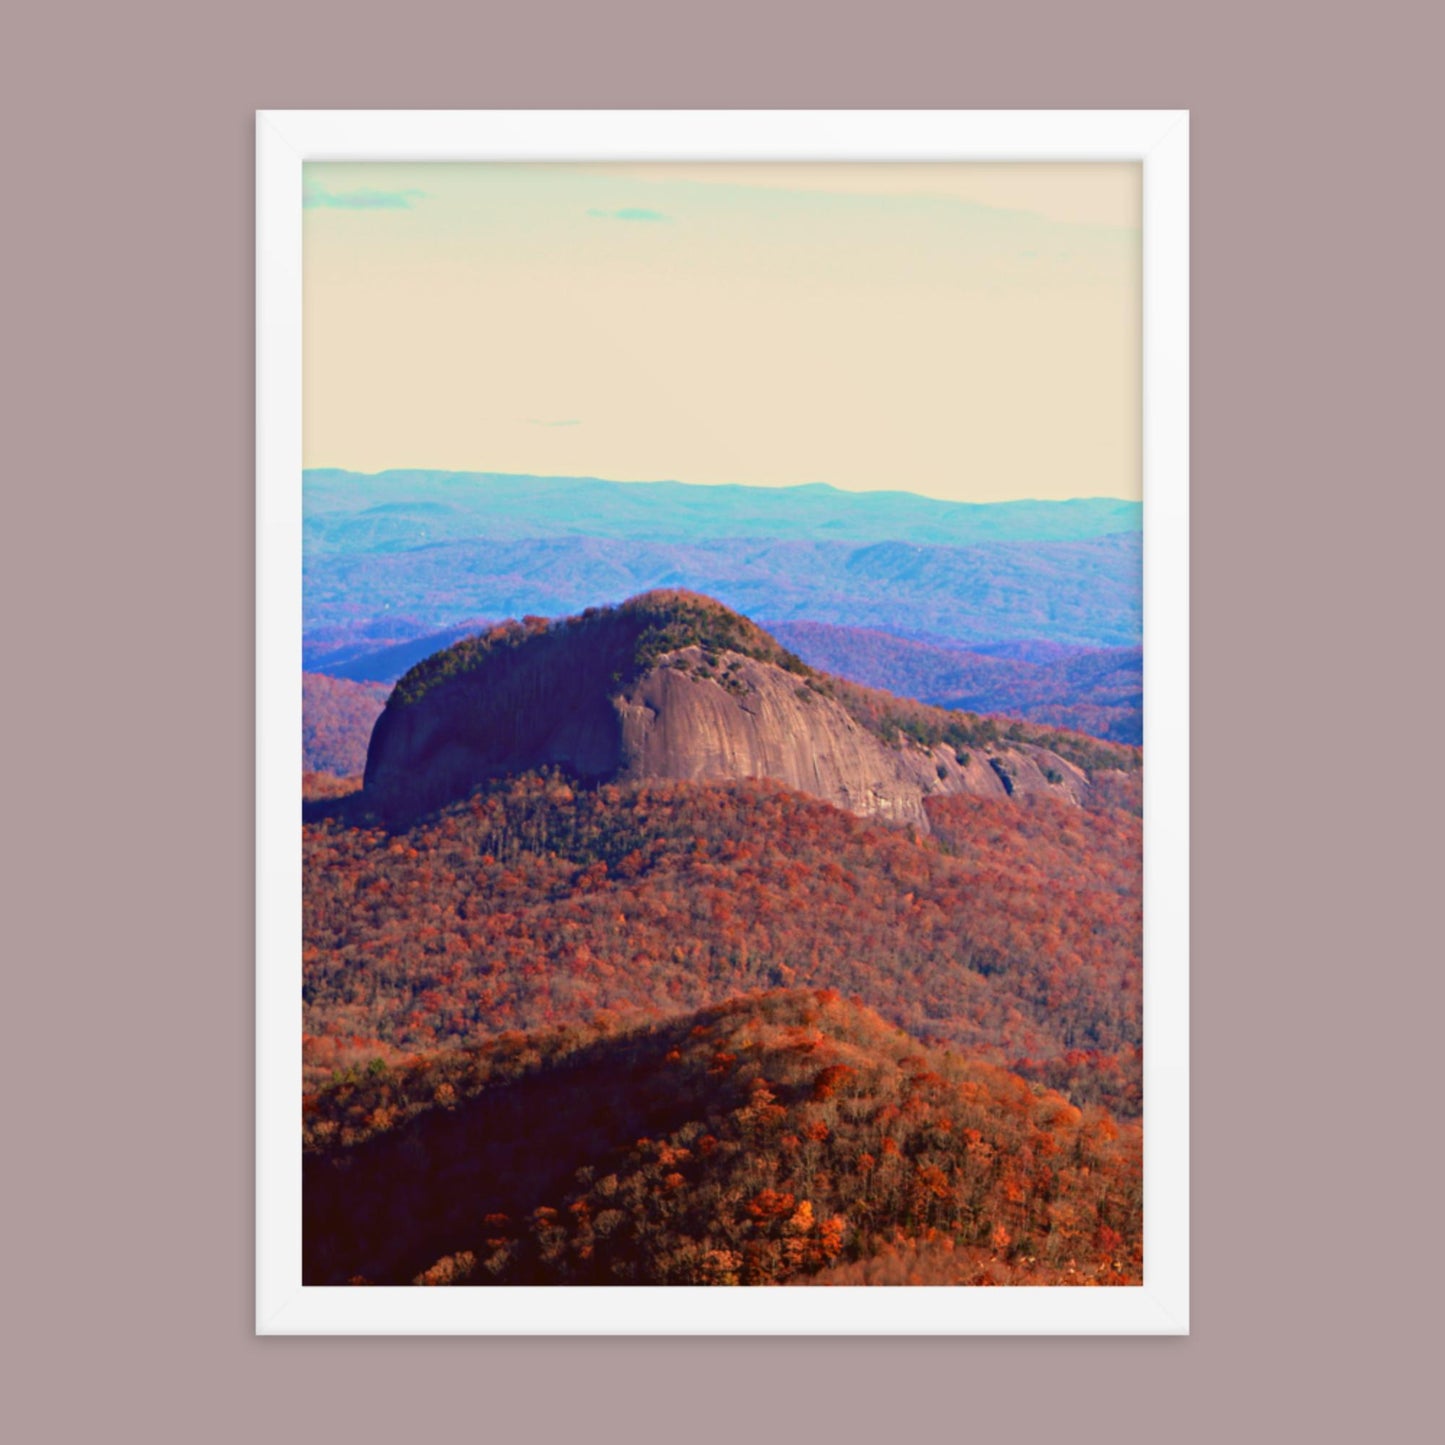 Looking Glass Rock- Framed photo paper poster